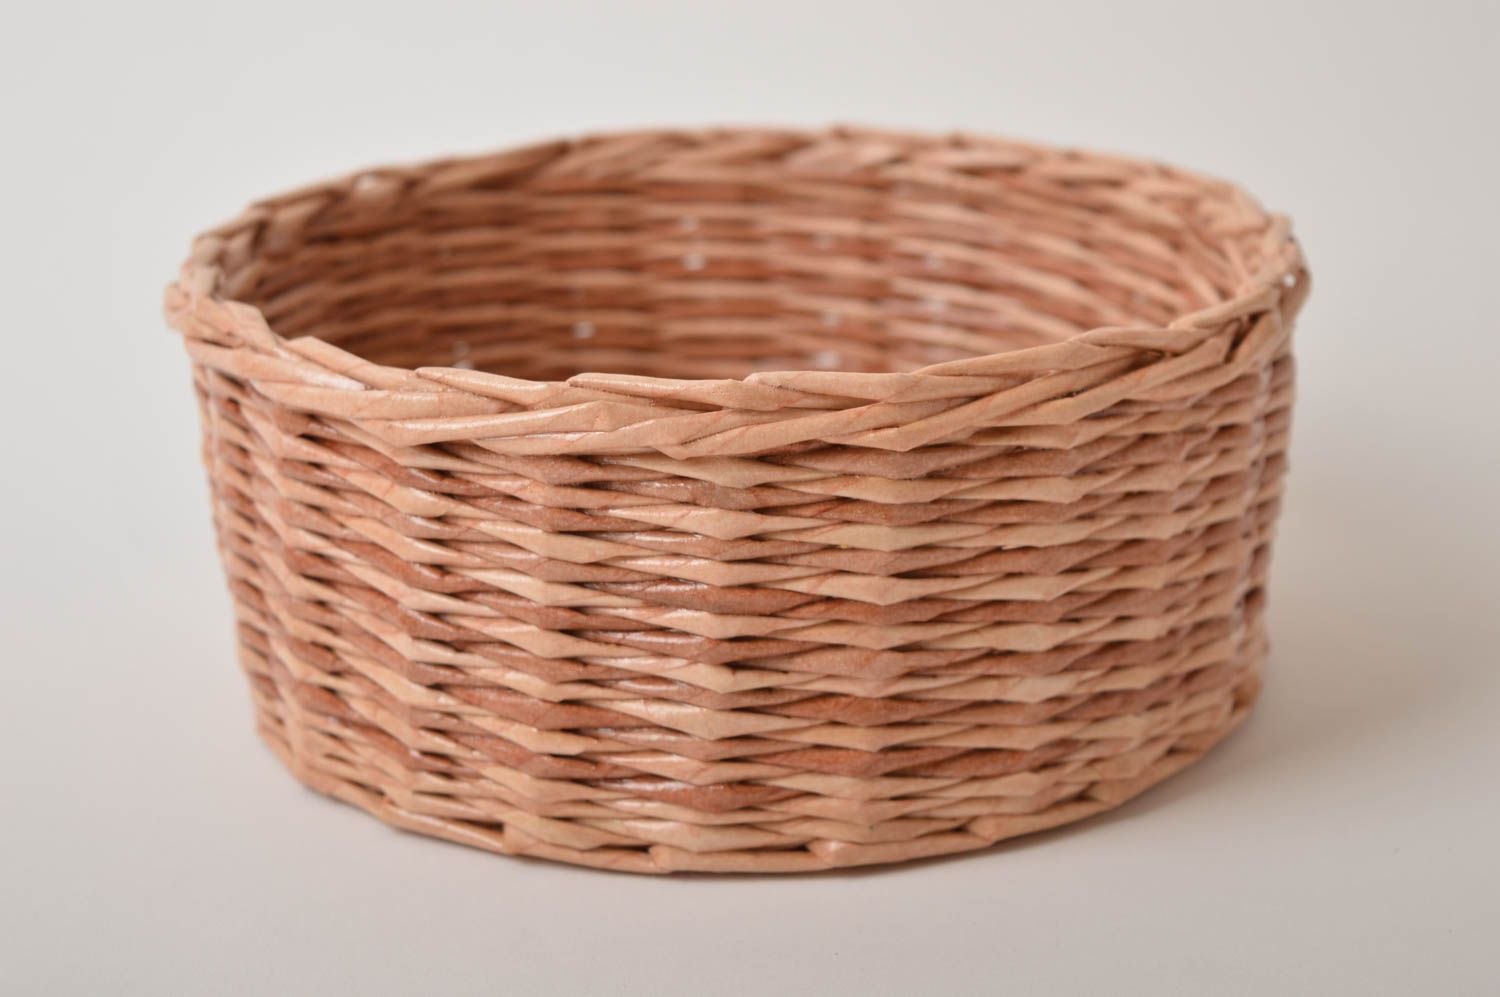 Paper basket homemade home decor storage basket small wicker basket cool gifts photo 3